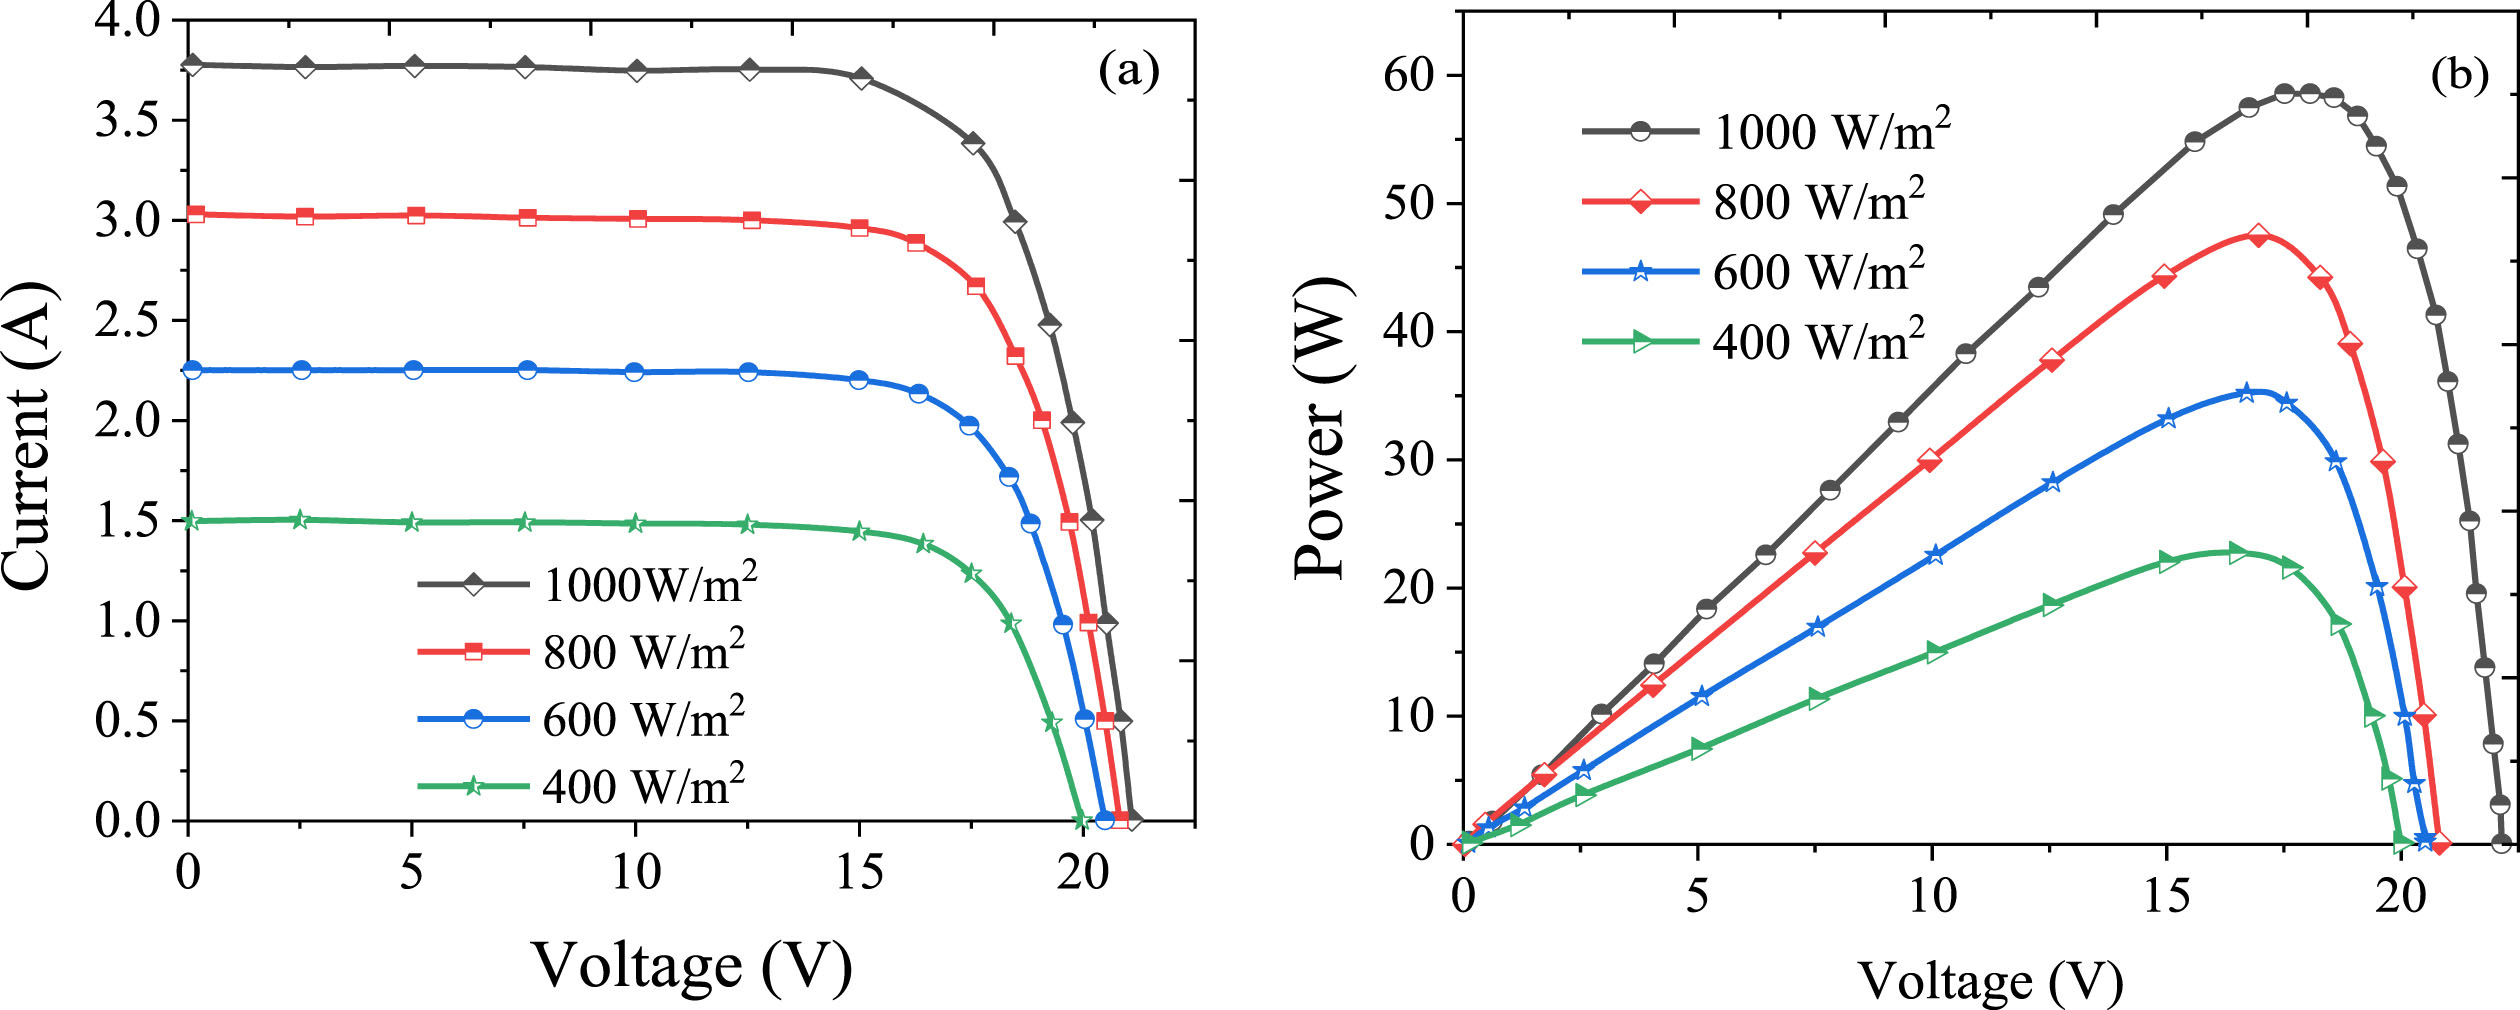 V-I (a) and P-V (b) curve at four irradiance variations and constant temperature.